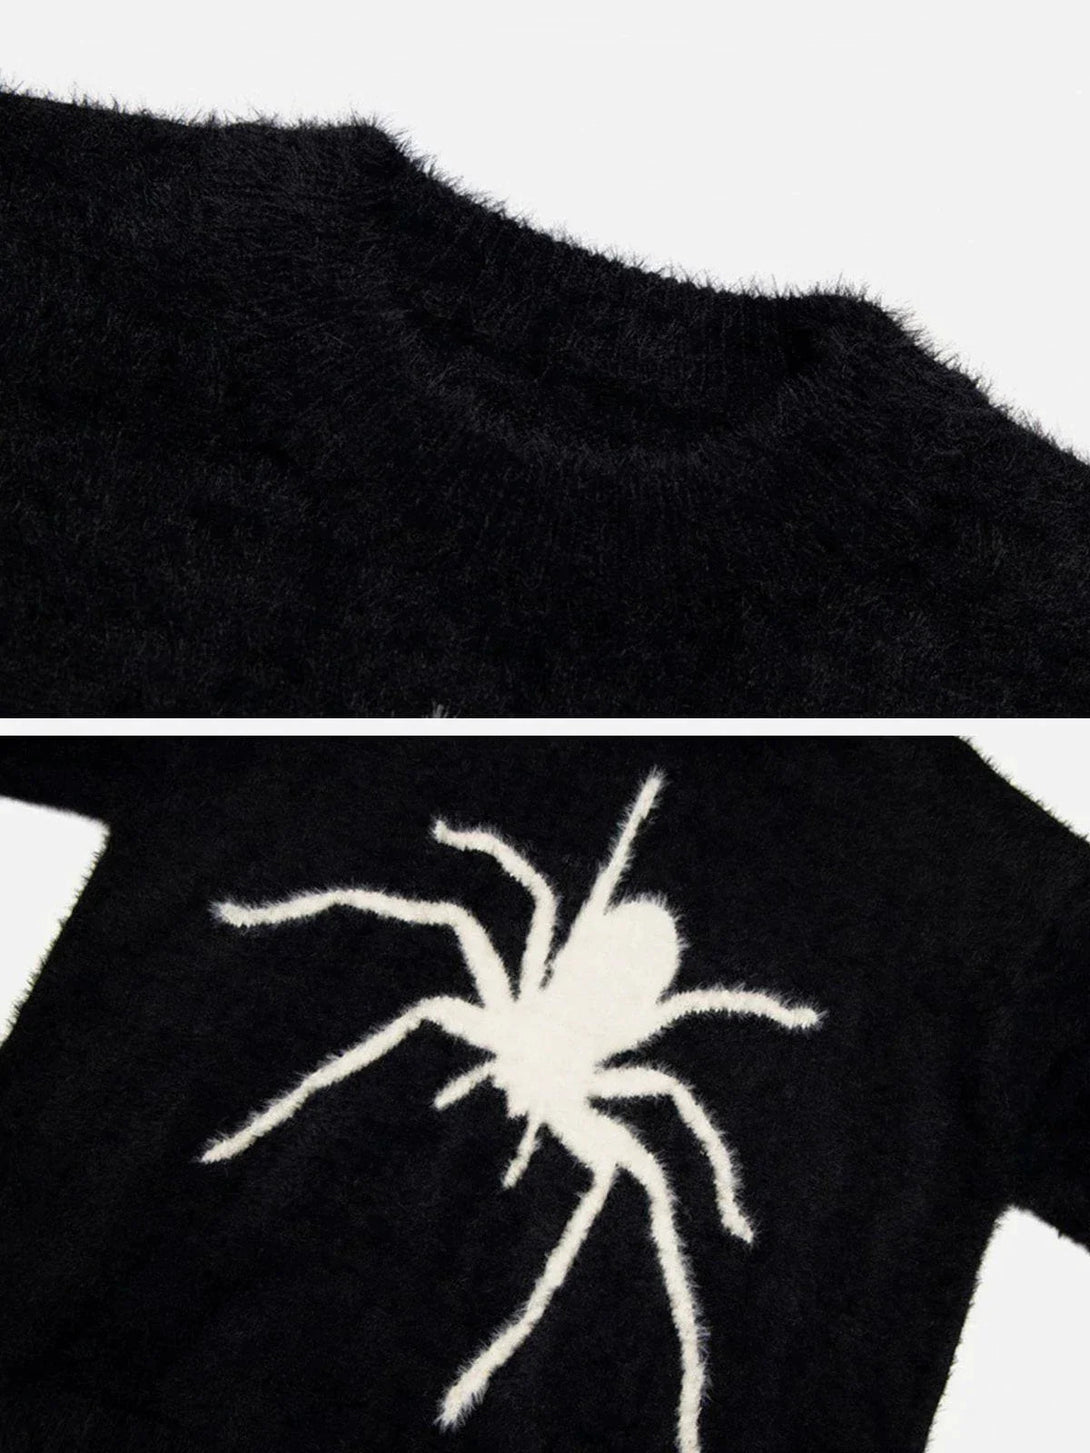 Majesda® - Spider Knit Mohair Sweater outfit ideas streetwear fashion